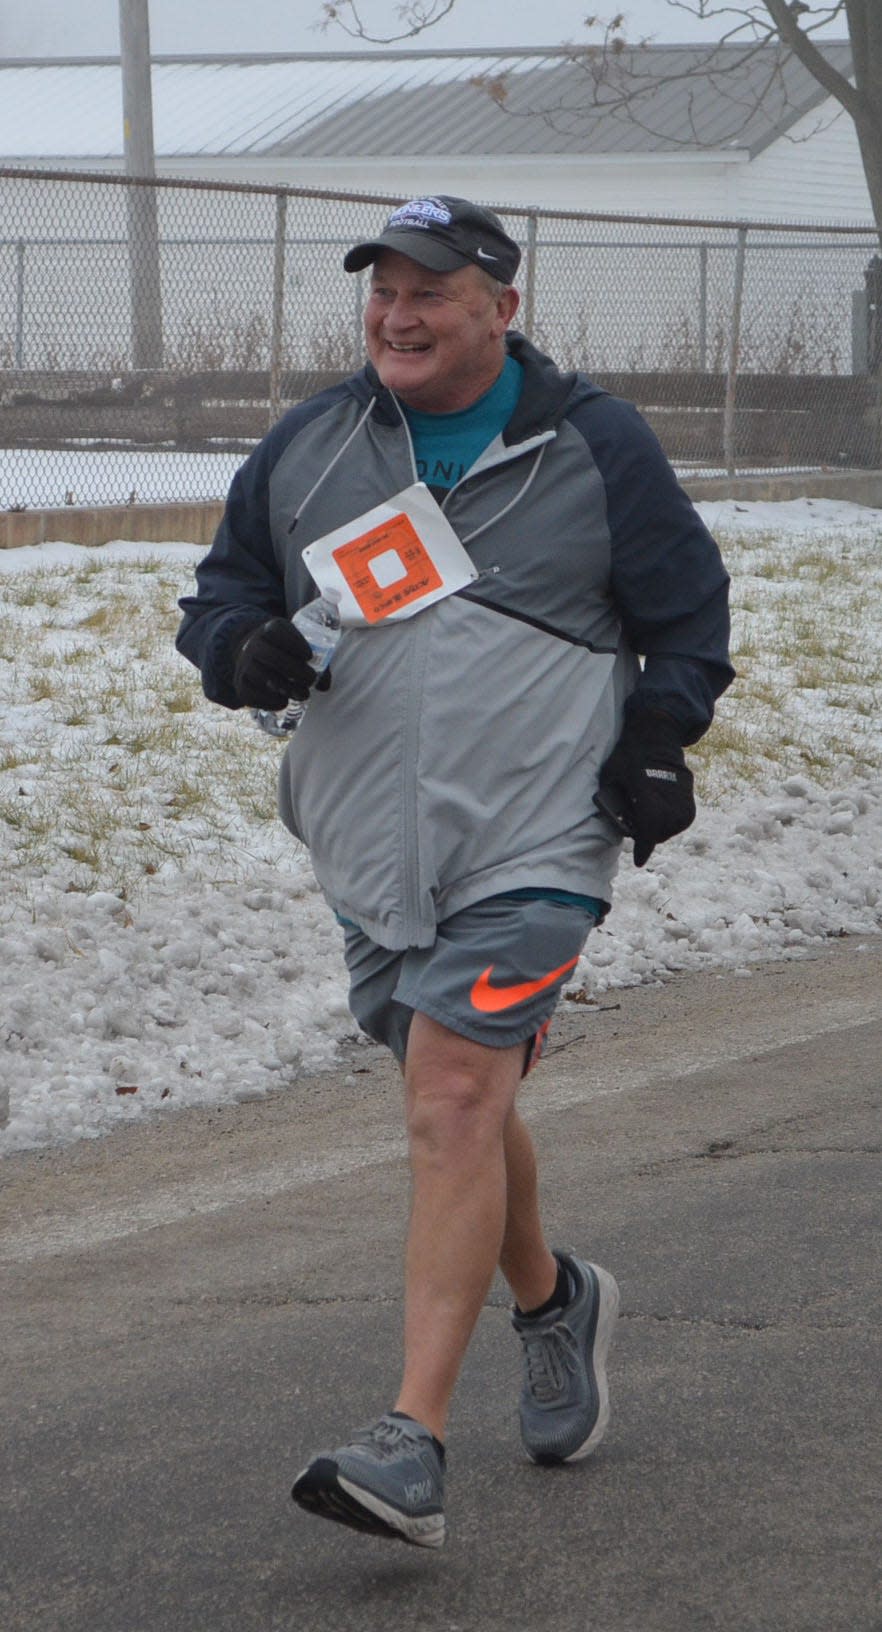 Kewanee's Mike Mahnesmith takes on the Hardcore 5K.